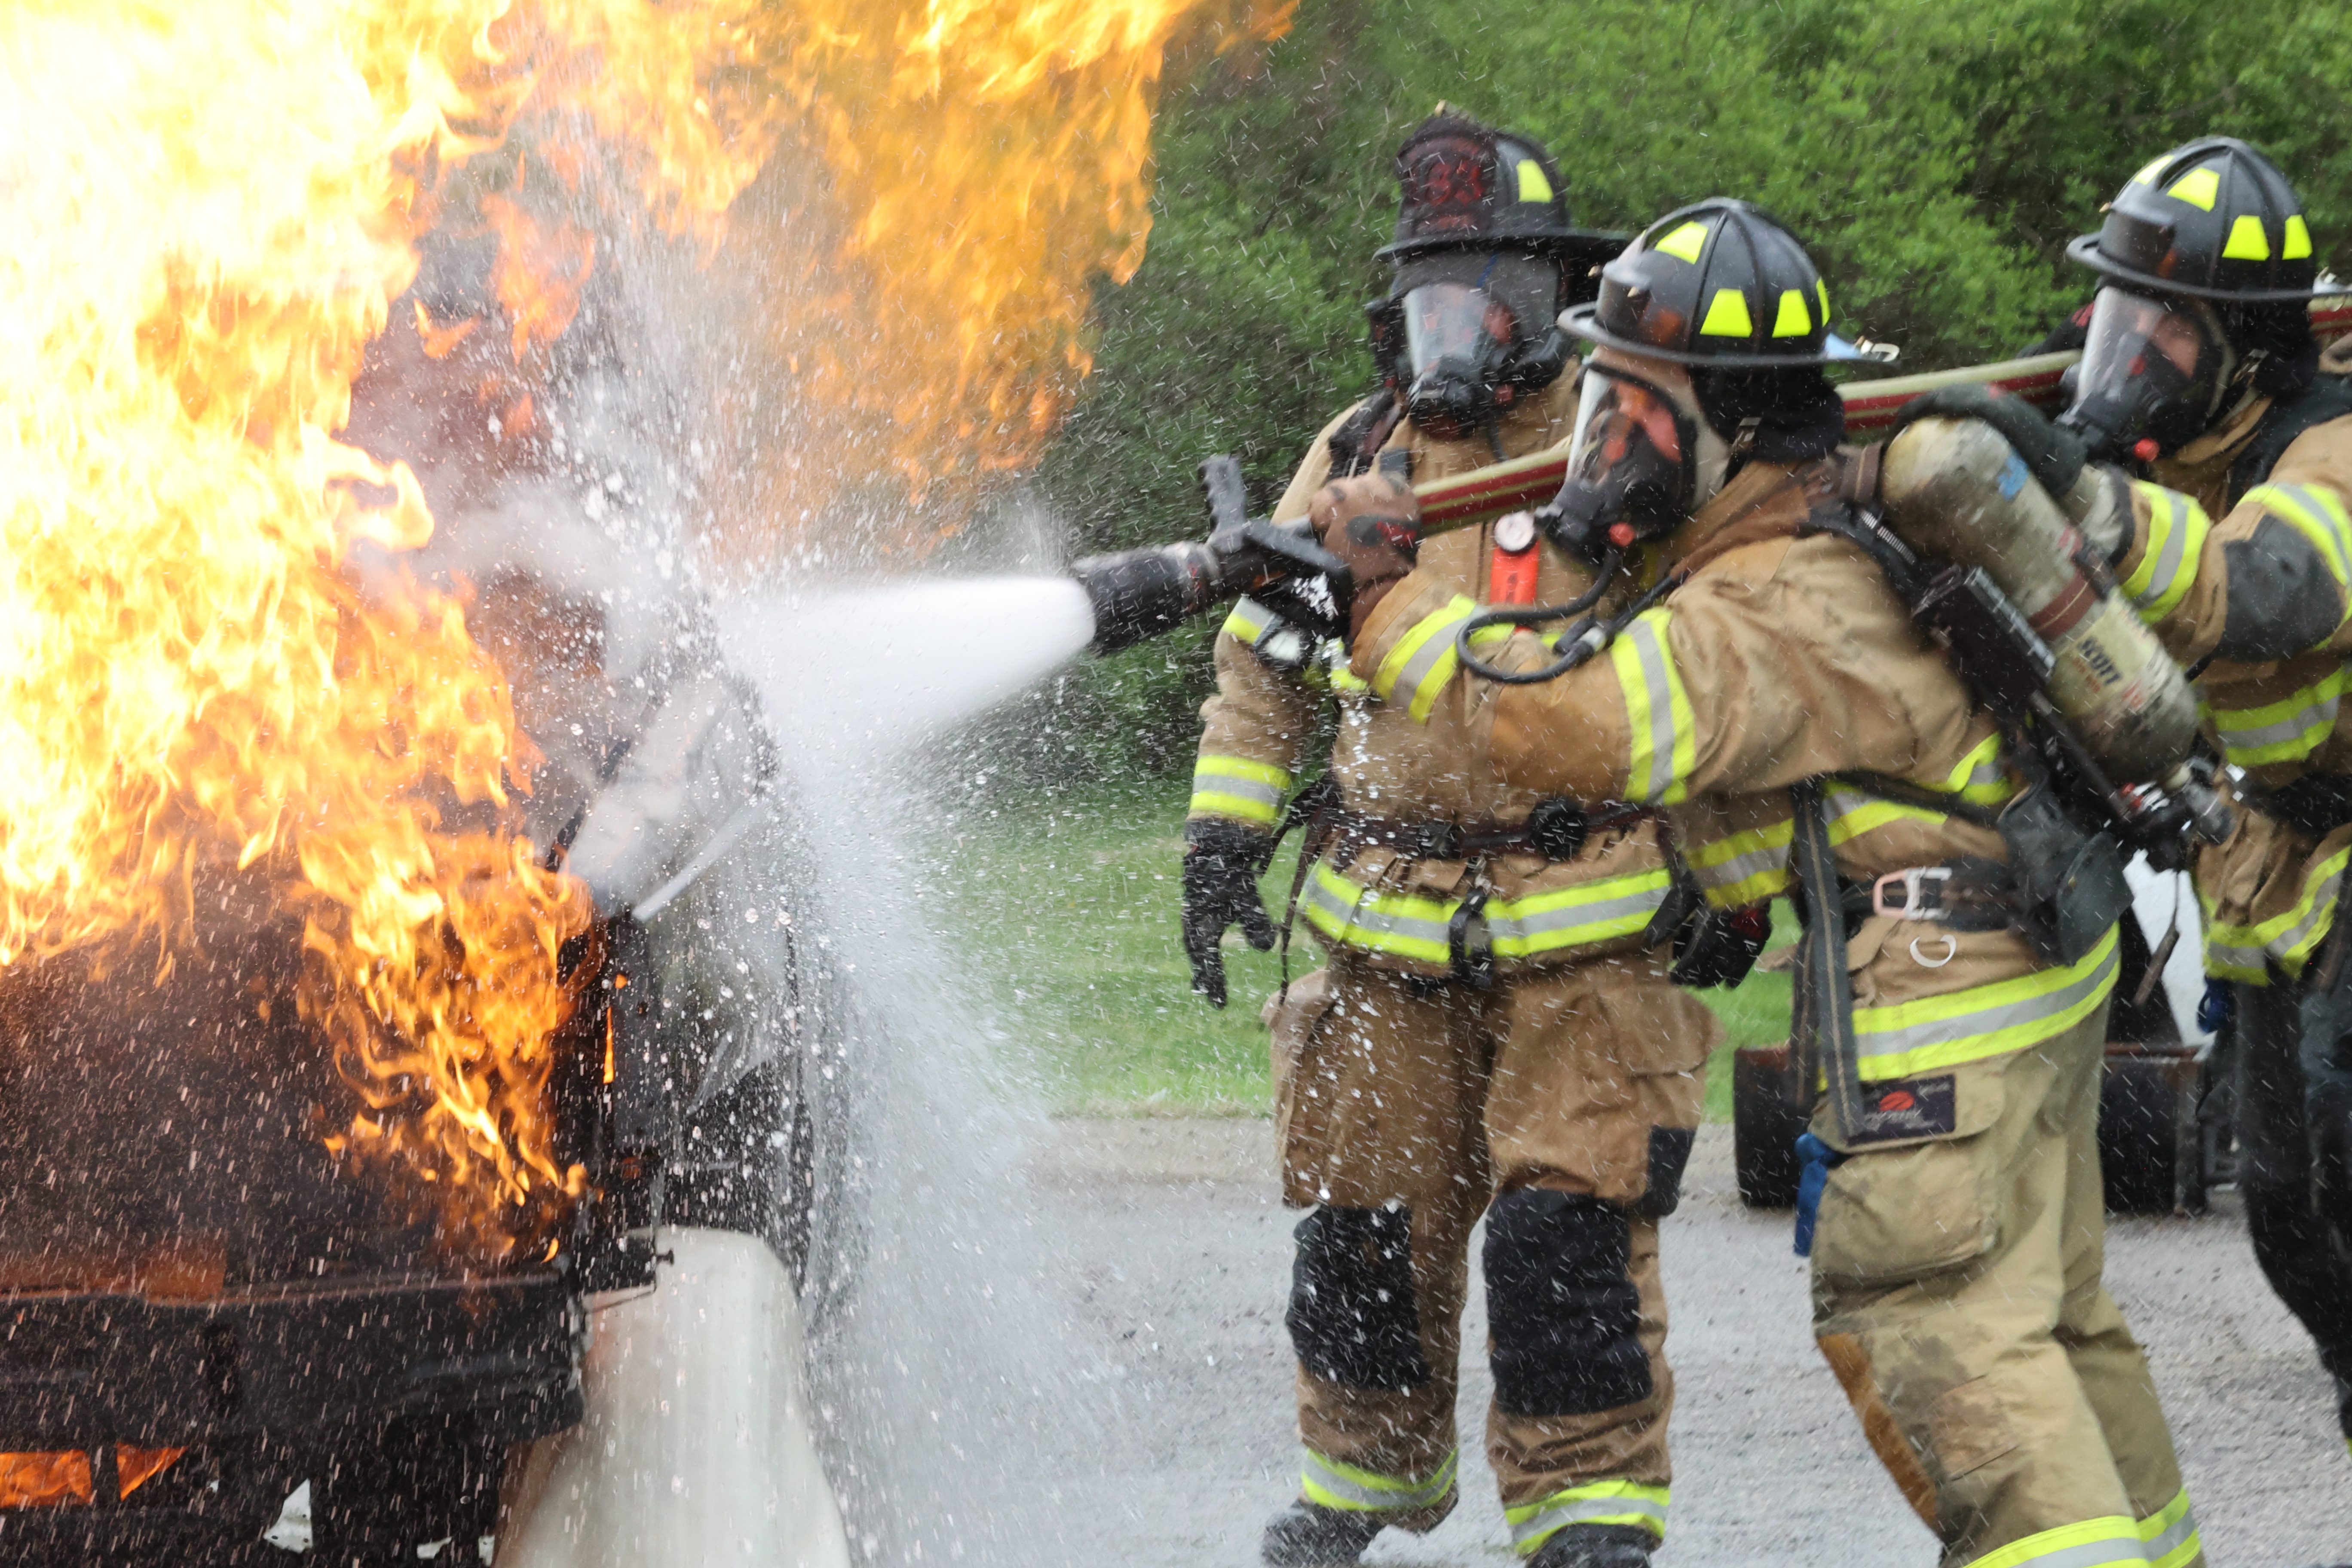 Firefighting students hold a hose spraying water on a burning car